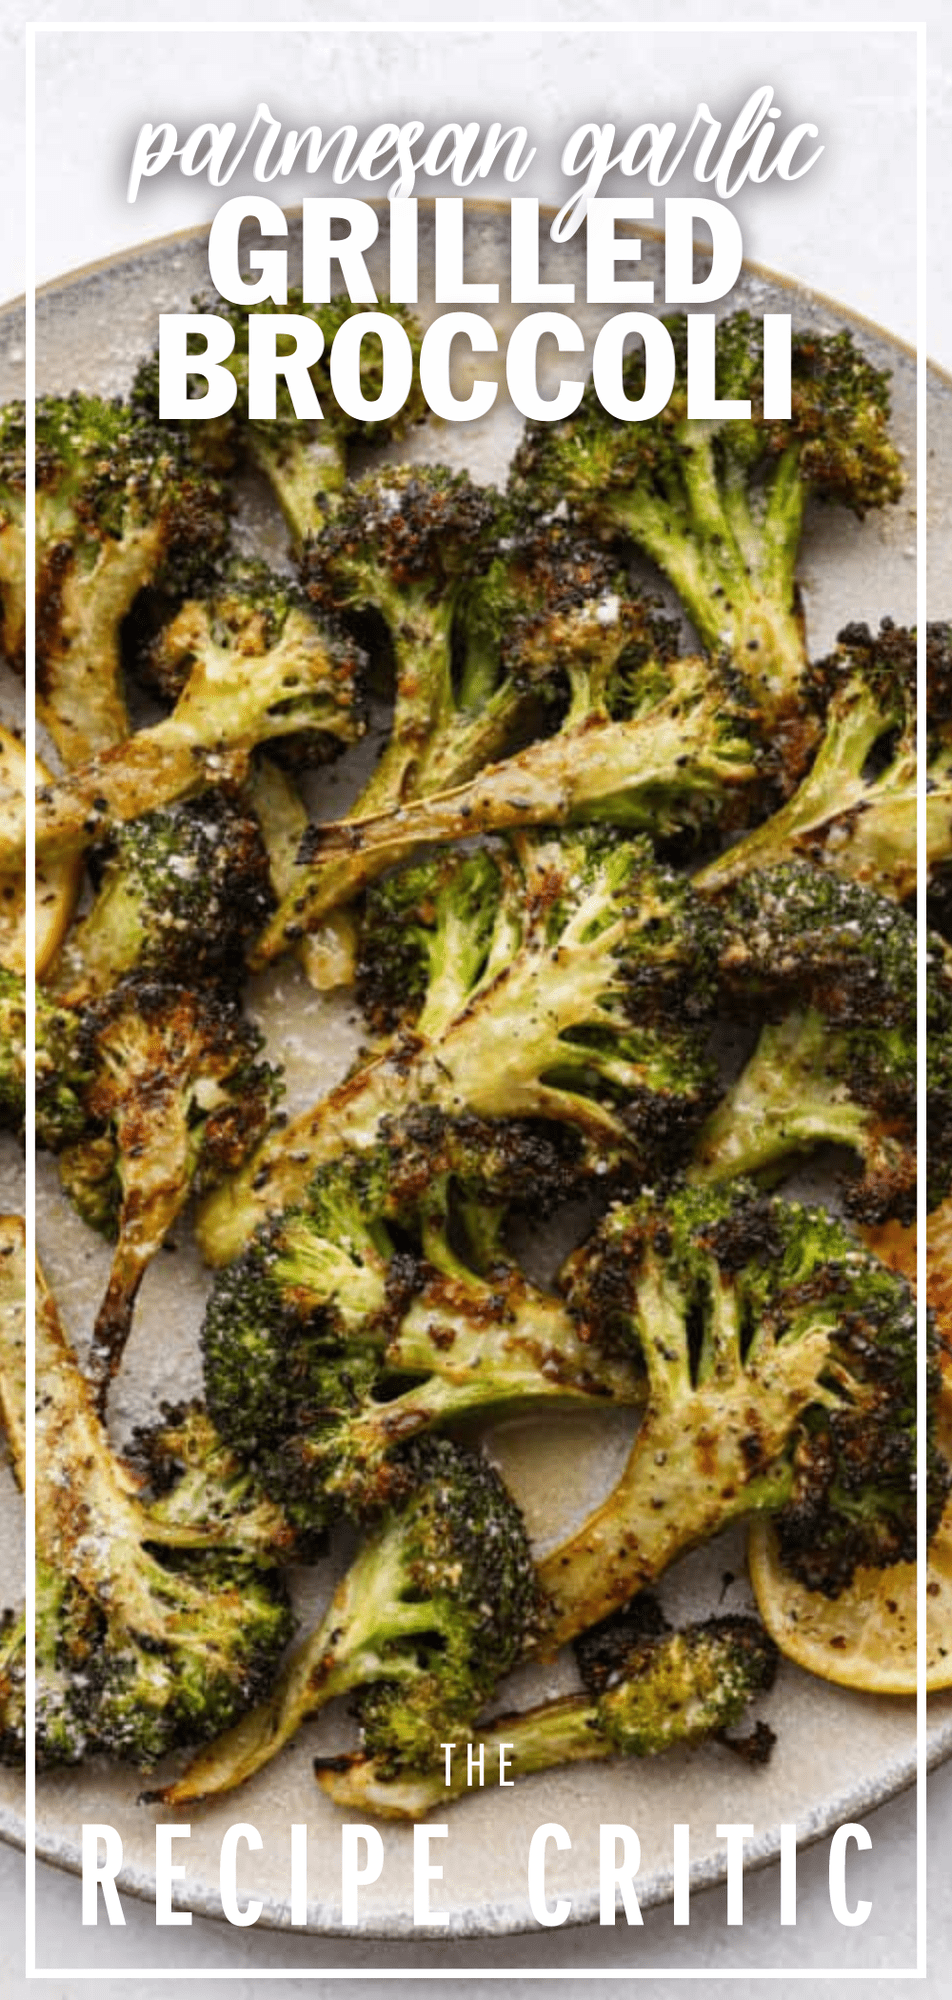 15-Minute Sauteed Broccoli with Garlic and Parmesan - Familystyle Food